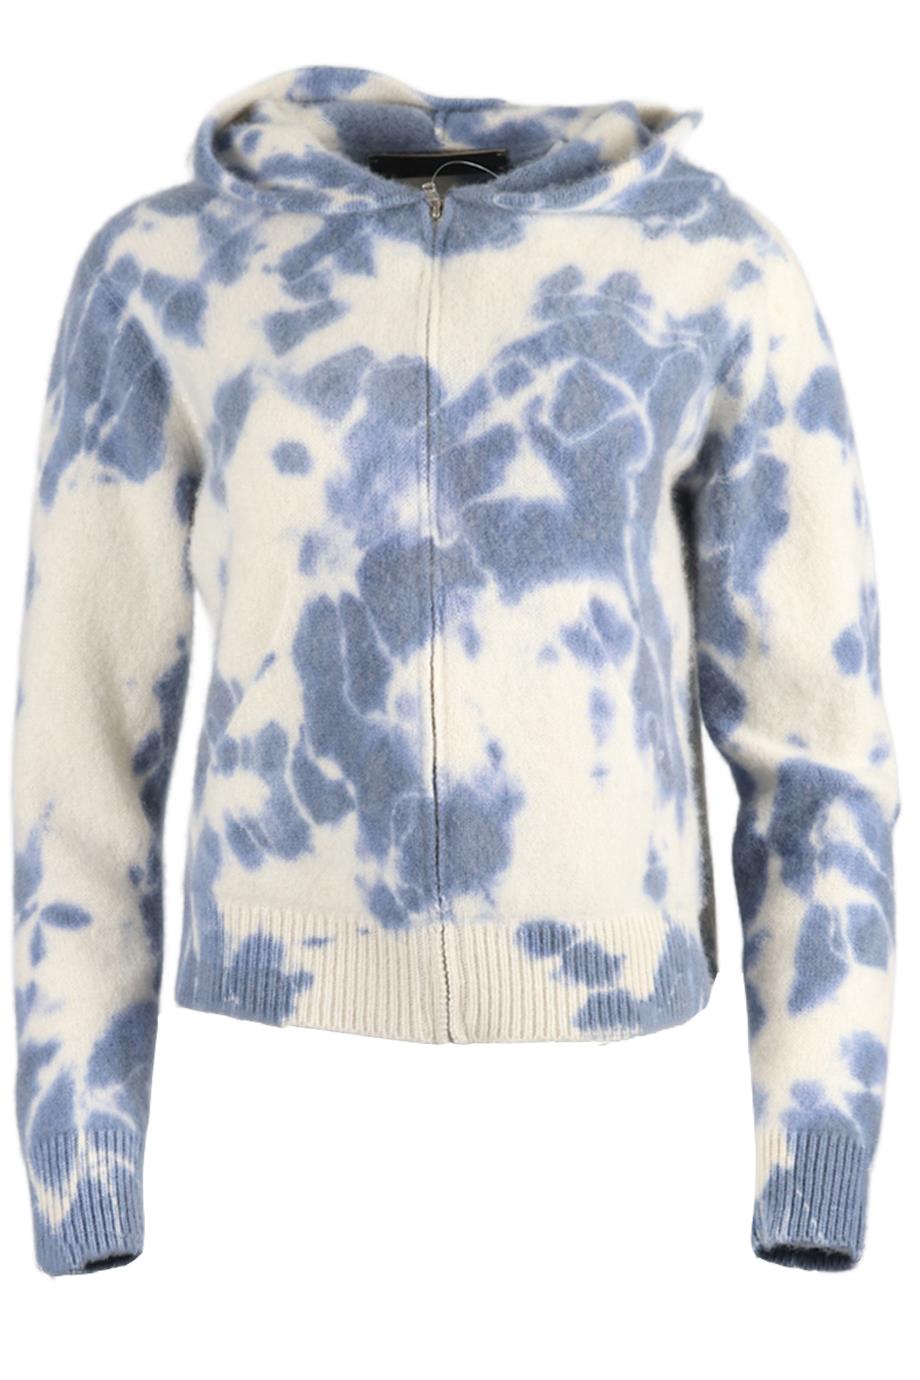 THE ELDER STATESMAN TIE DYED CASHMERE HOODIE LARGE